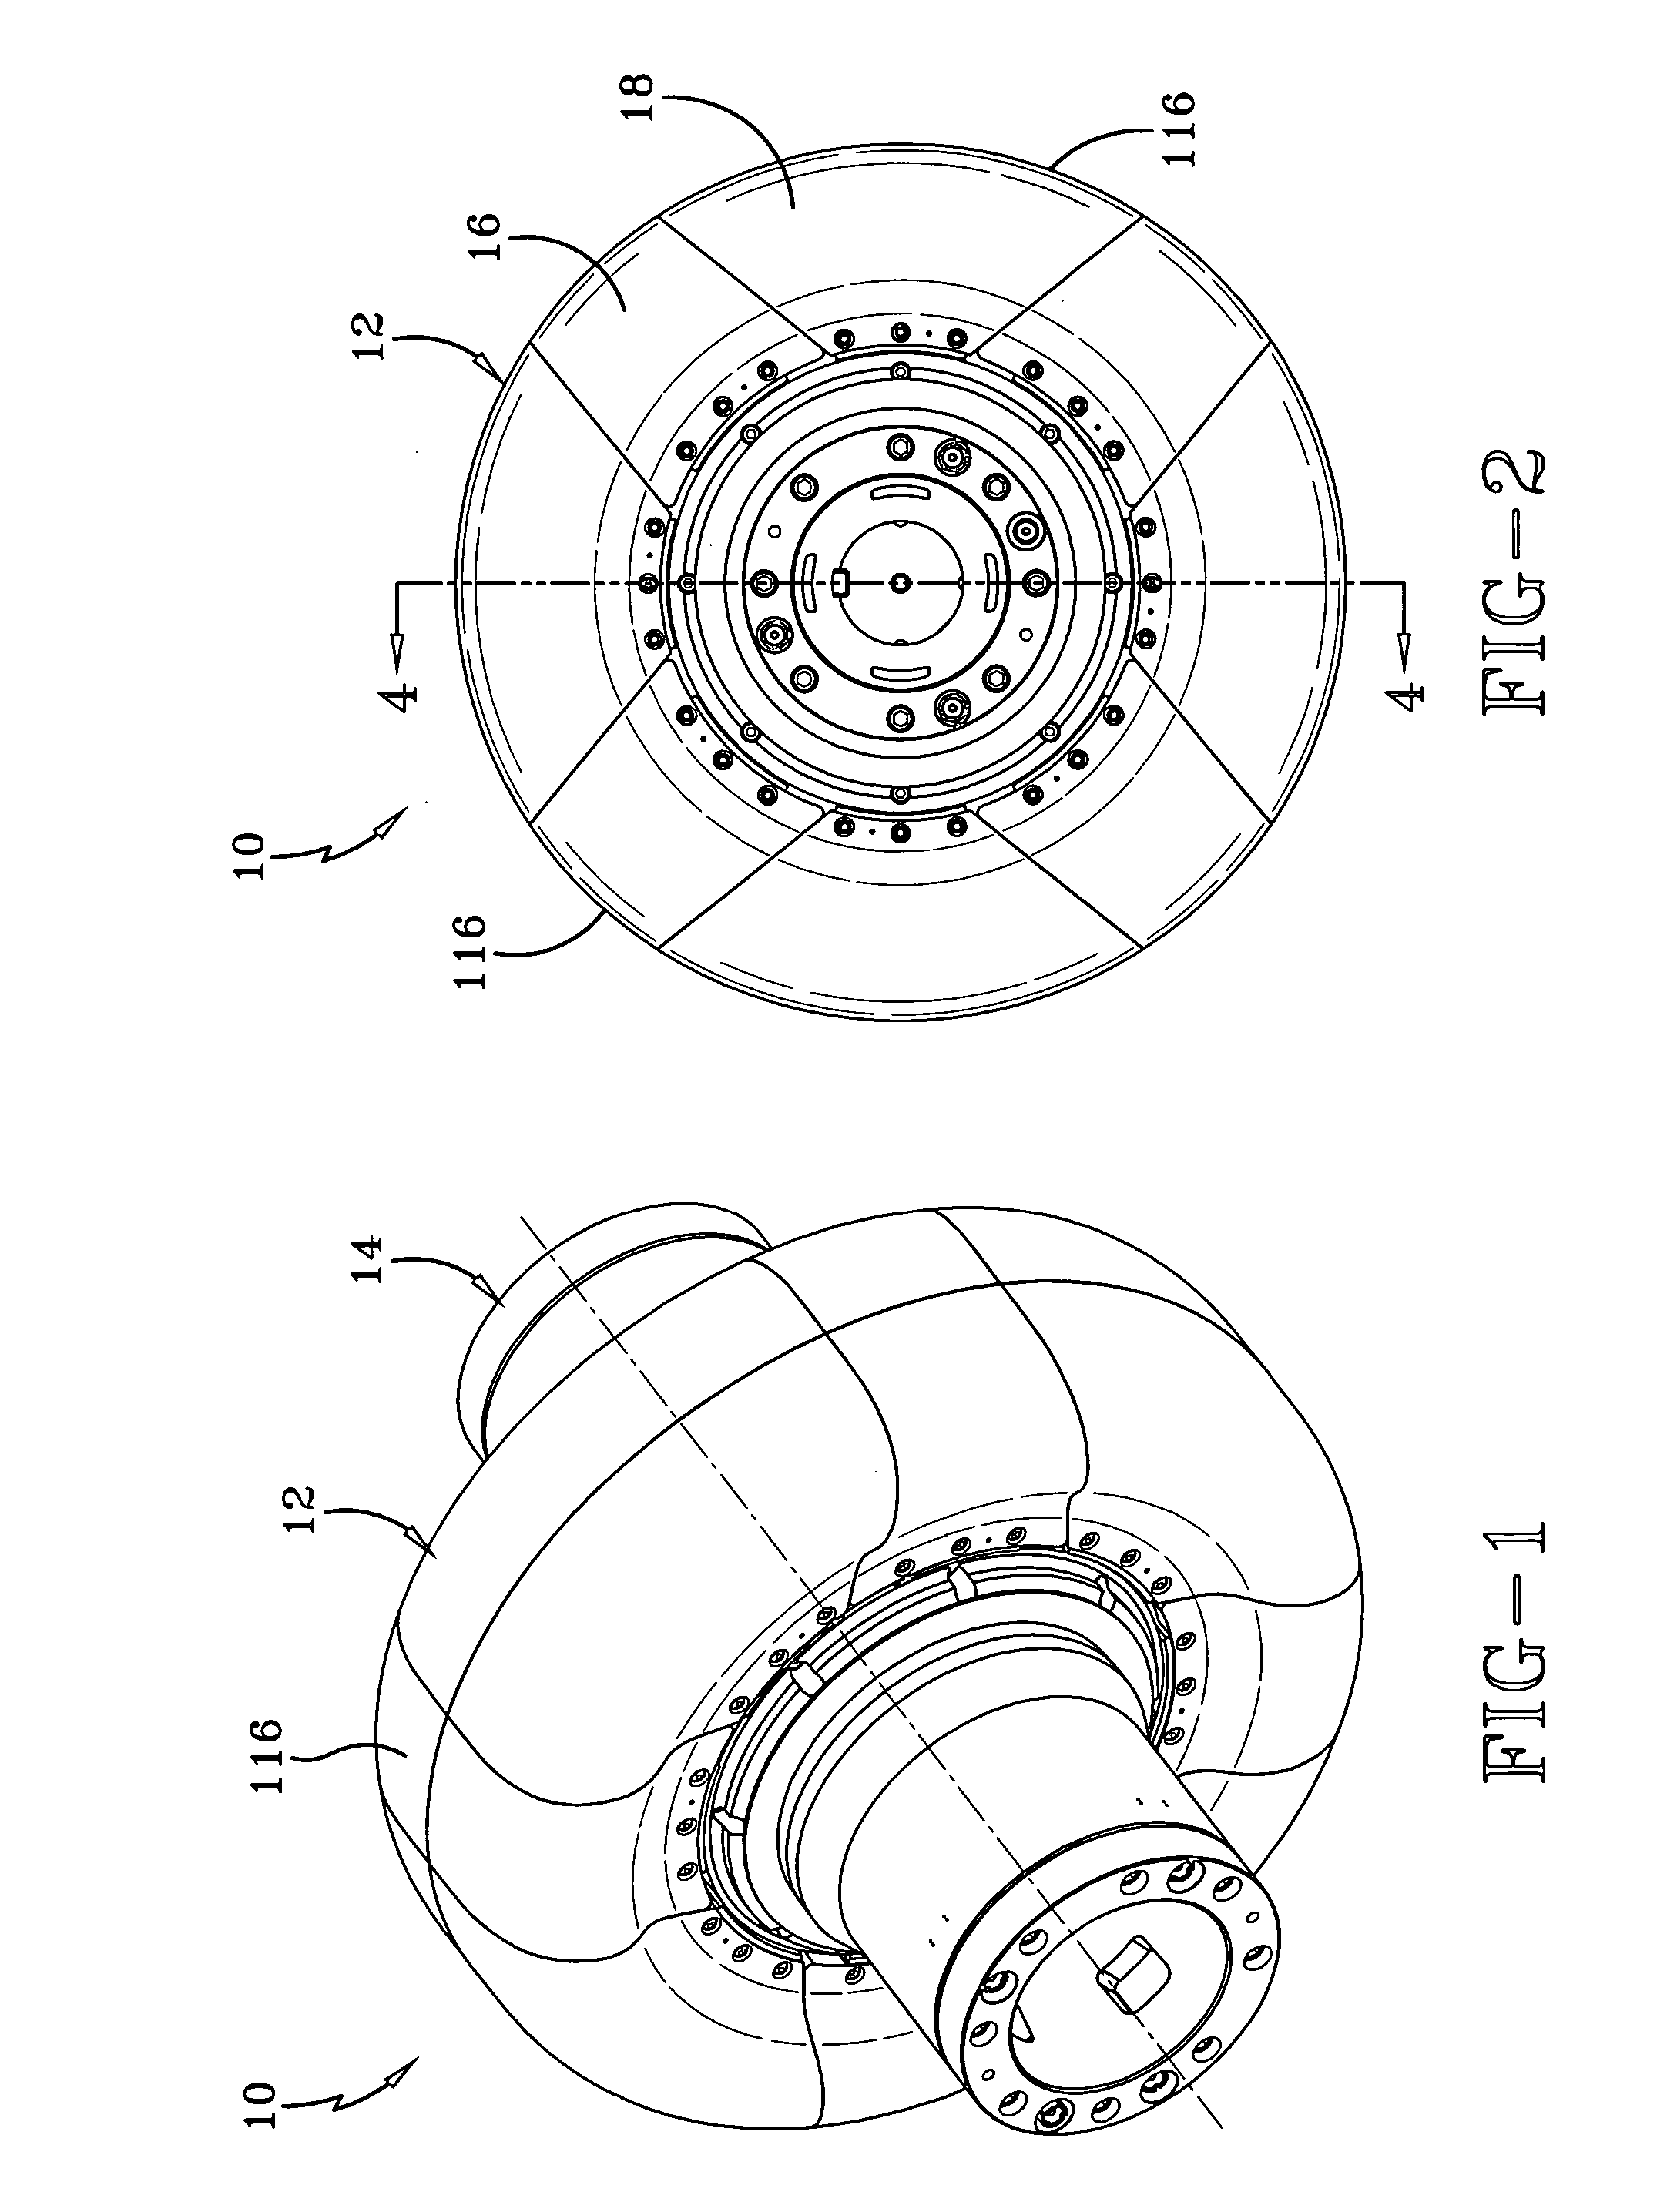 Tire building core latching and transport mechanism